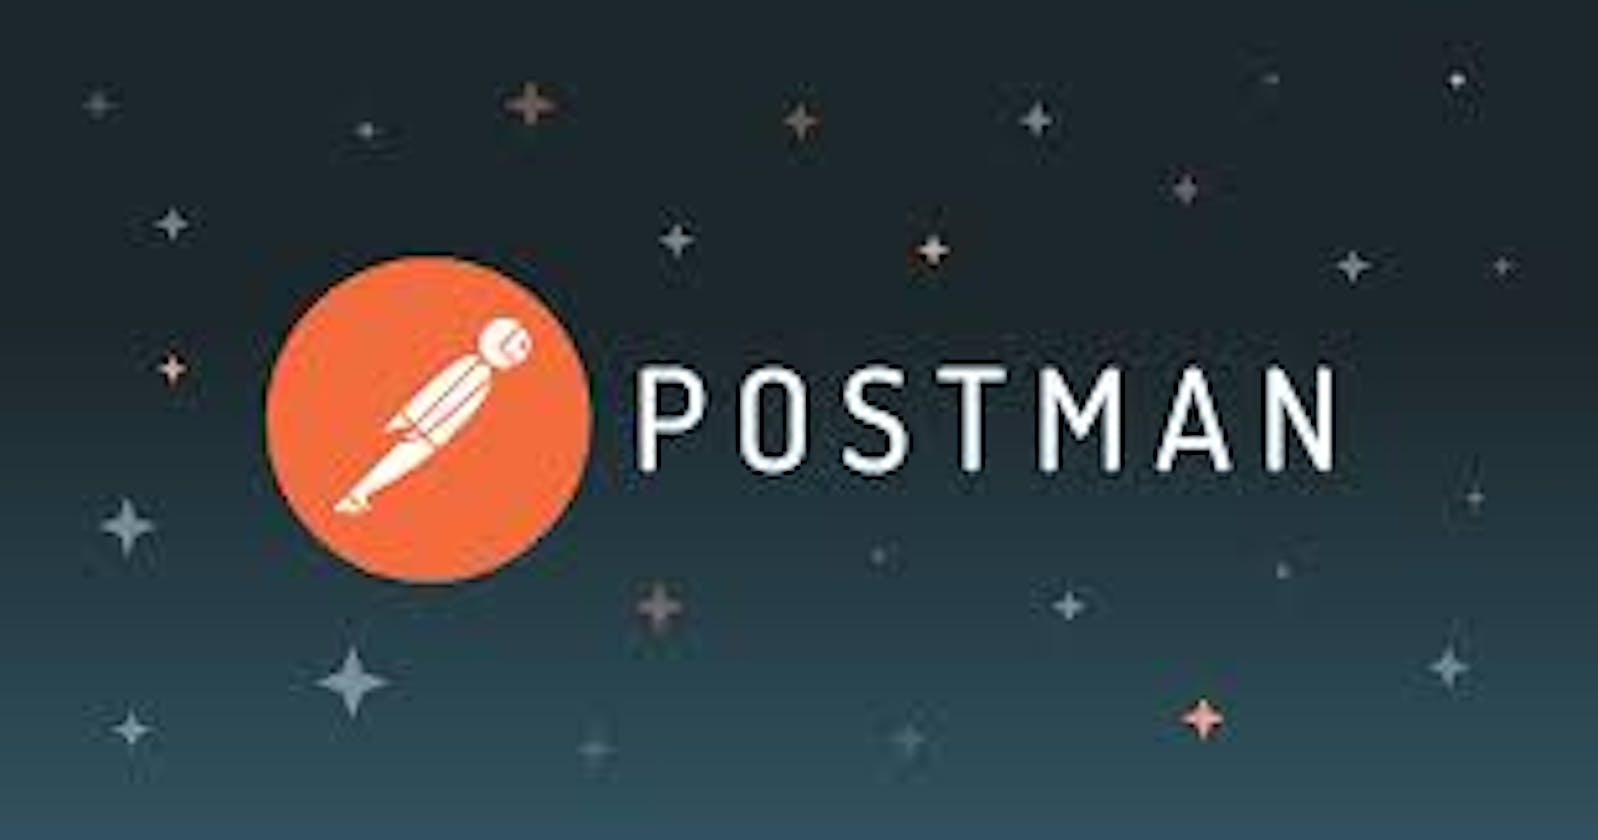 Learning About APIs and Postman: My experience at API101 by Yash Katyan and Maharishi Sinha